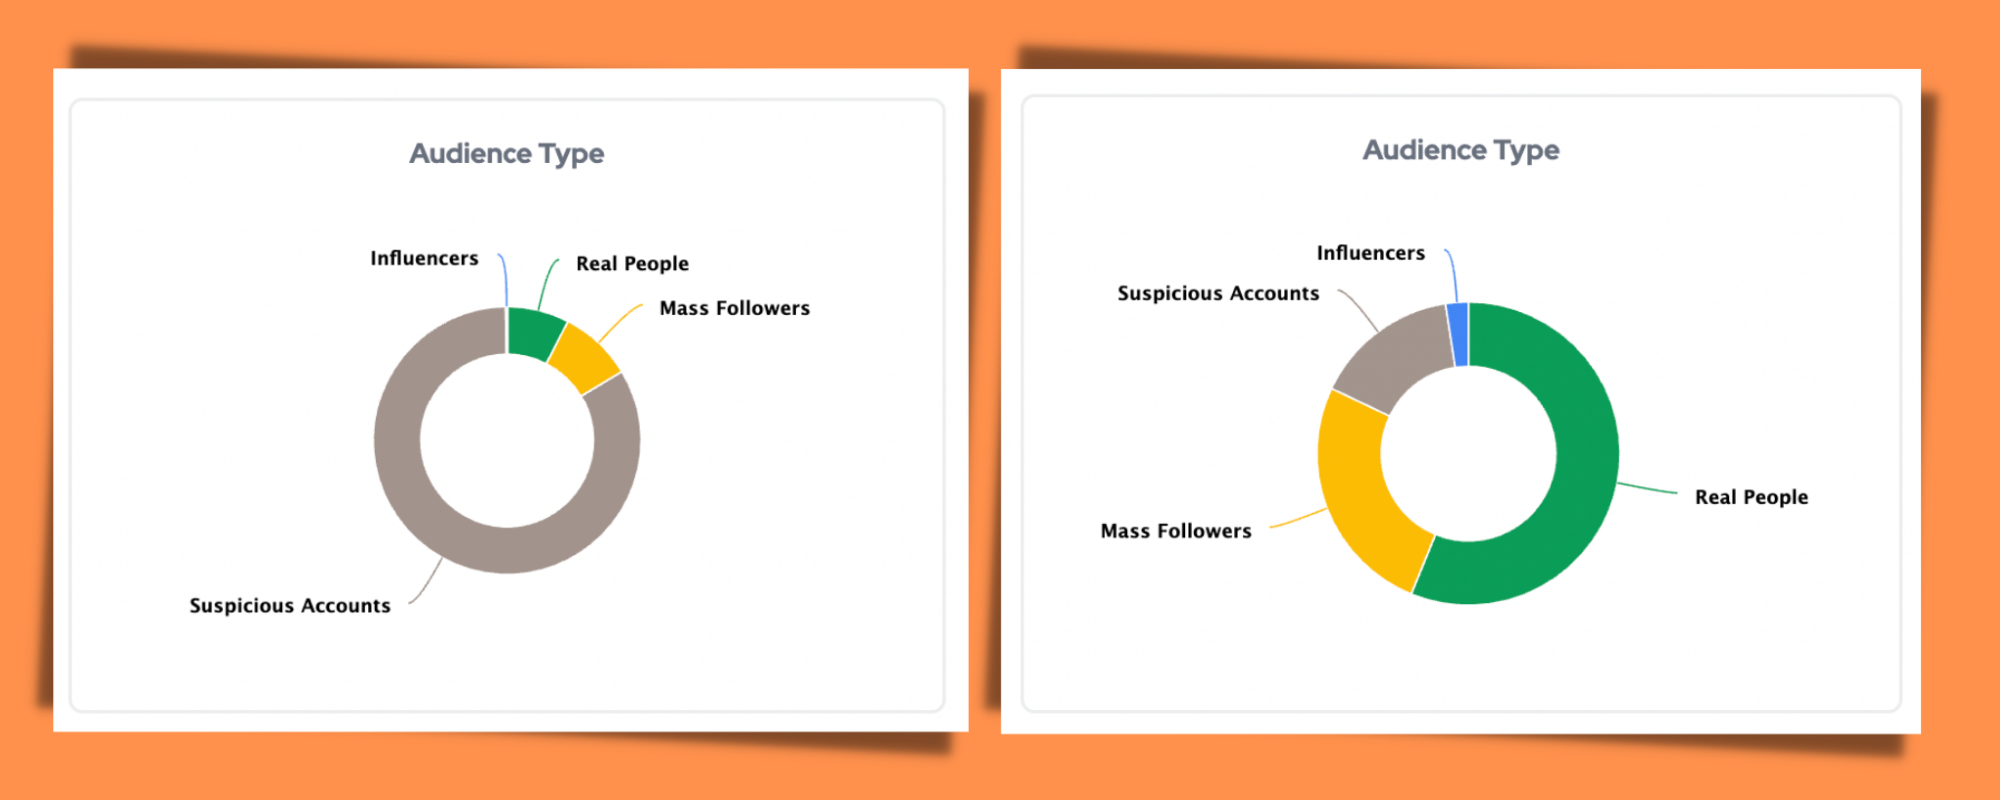 cipio.ai audience analysis Reasons Why Your Influencer Program is Not Working (or Isn't Working as Well as It Used to)